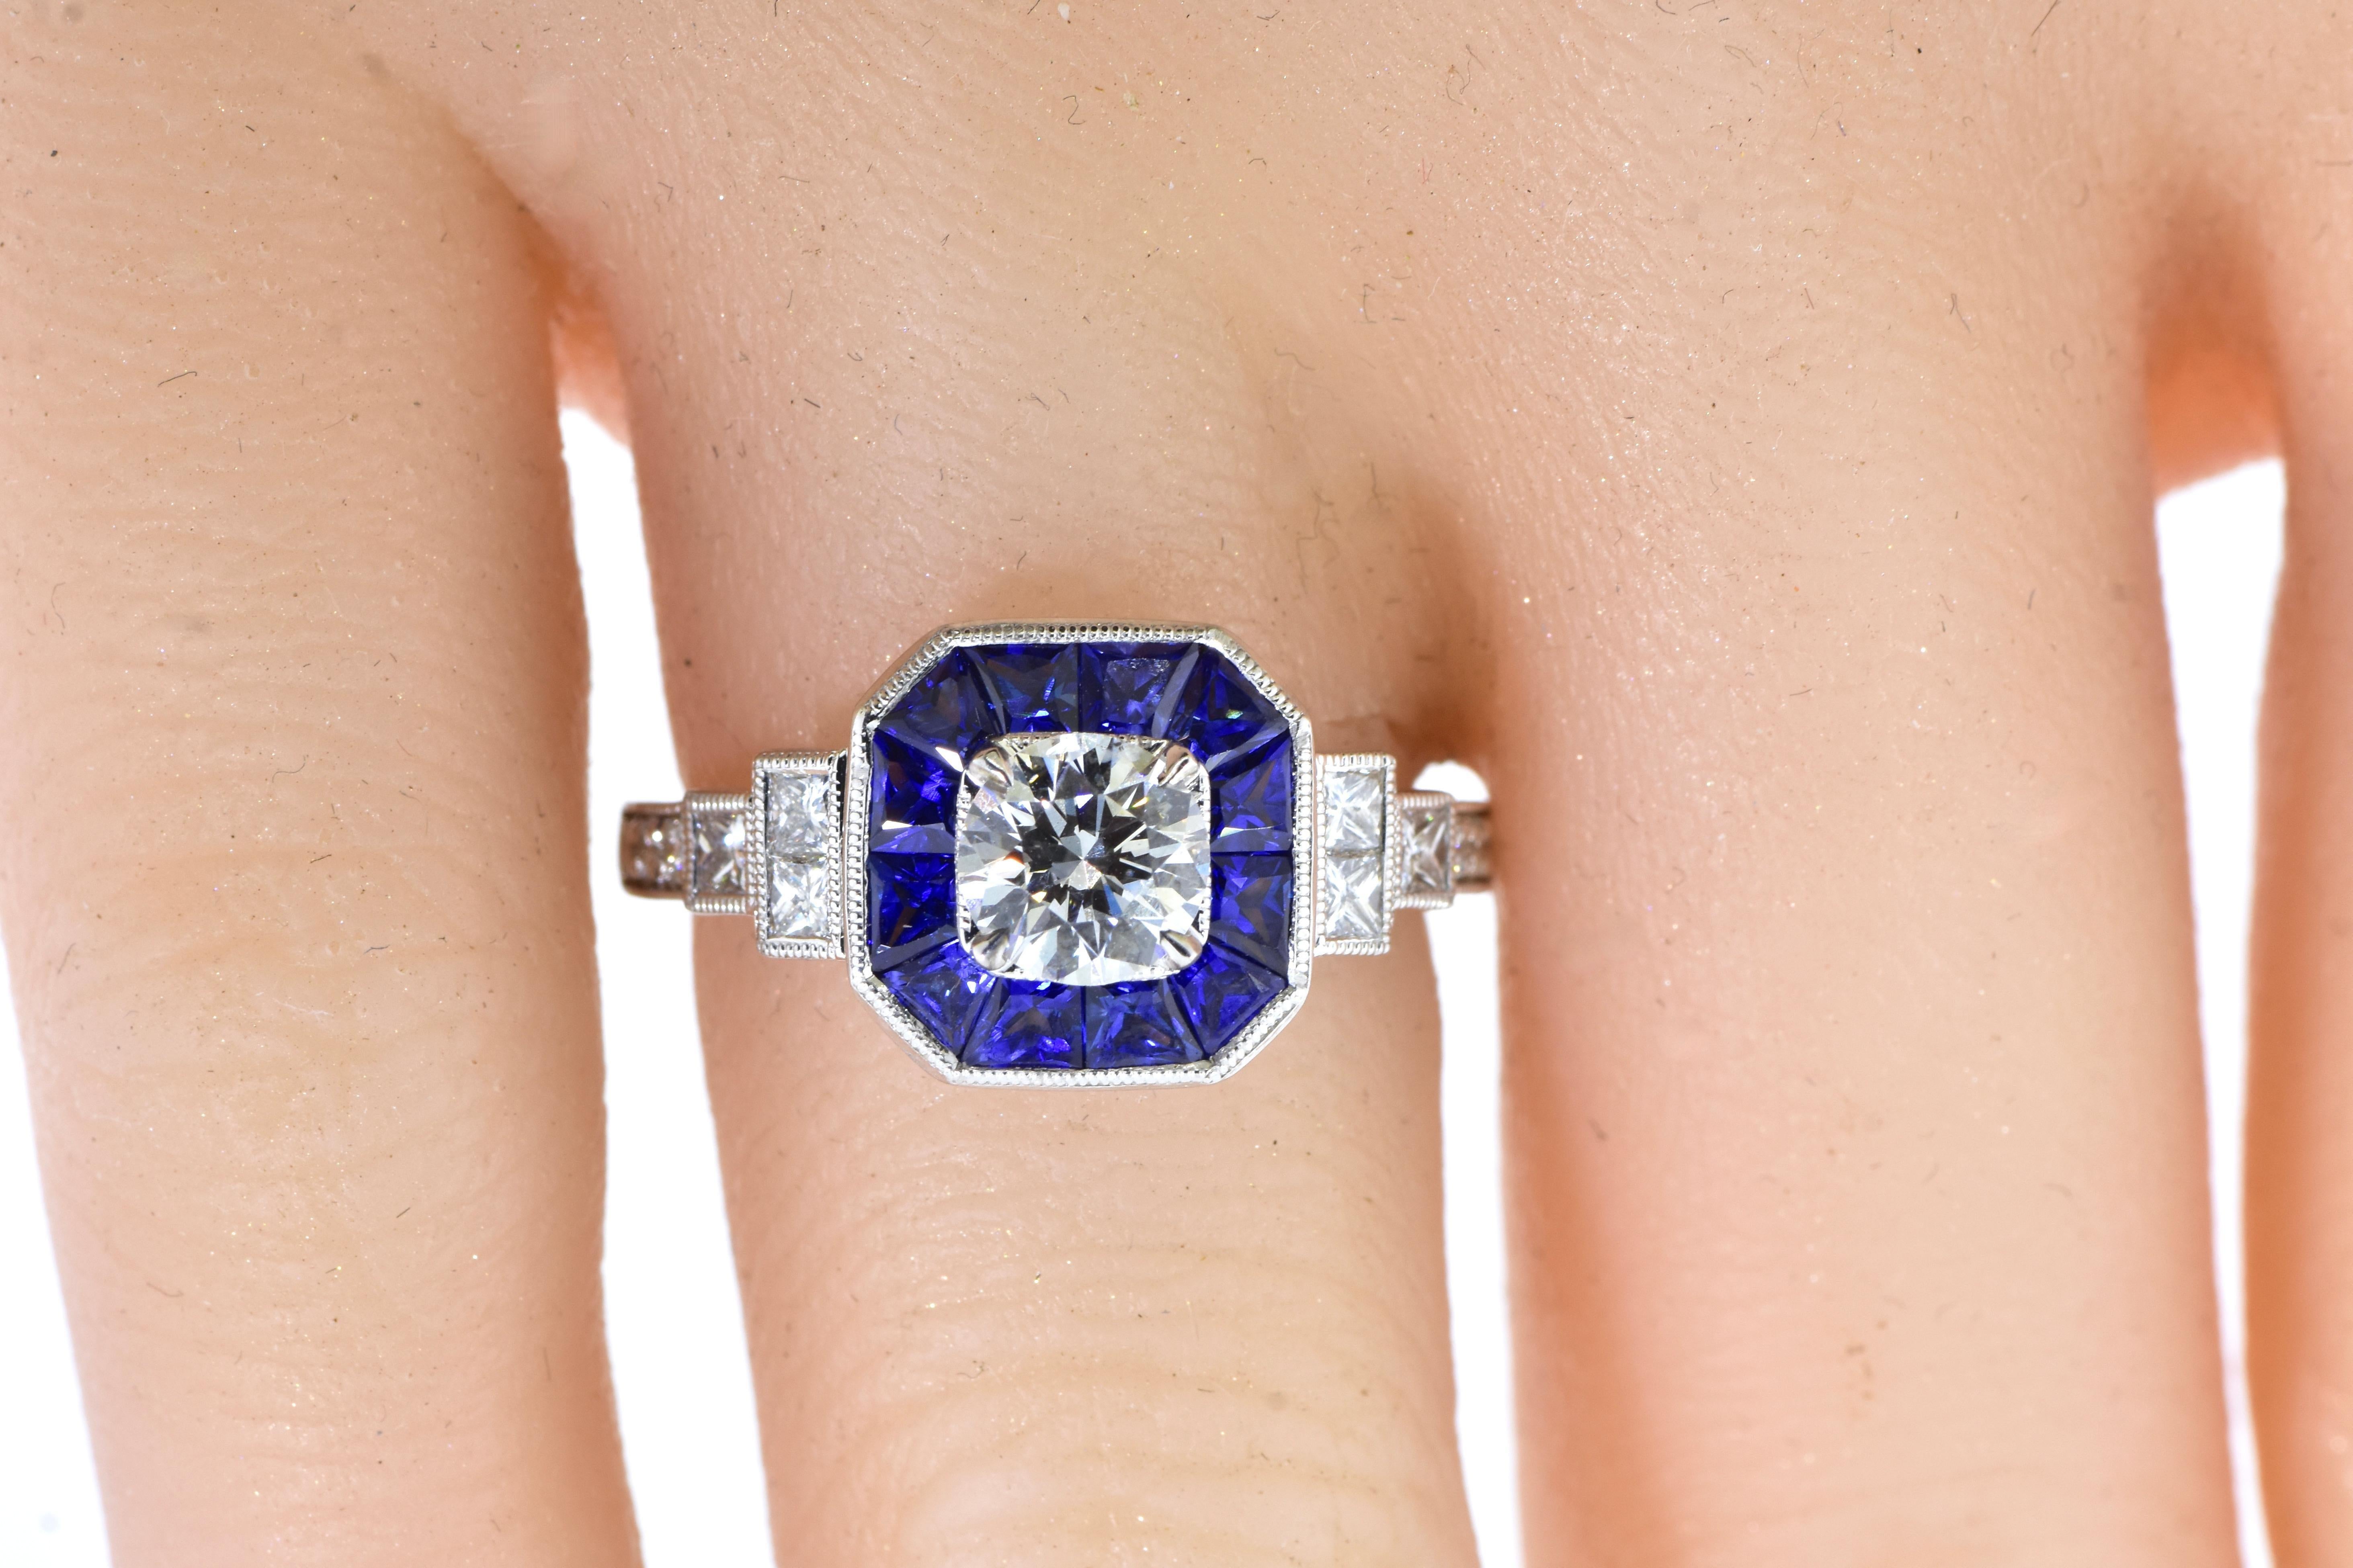 Sapphire and Diamond white gold contemporary new ring. 18K (marked 750), white gold well made ring possessing 12 fancy cut natural excellent color bright blue sapphires - not too light nor too dark - weighing an estimated 1.0 cts. the 12 smaller